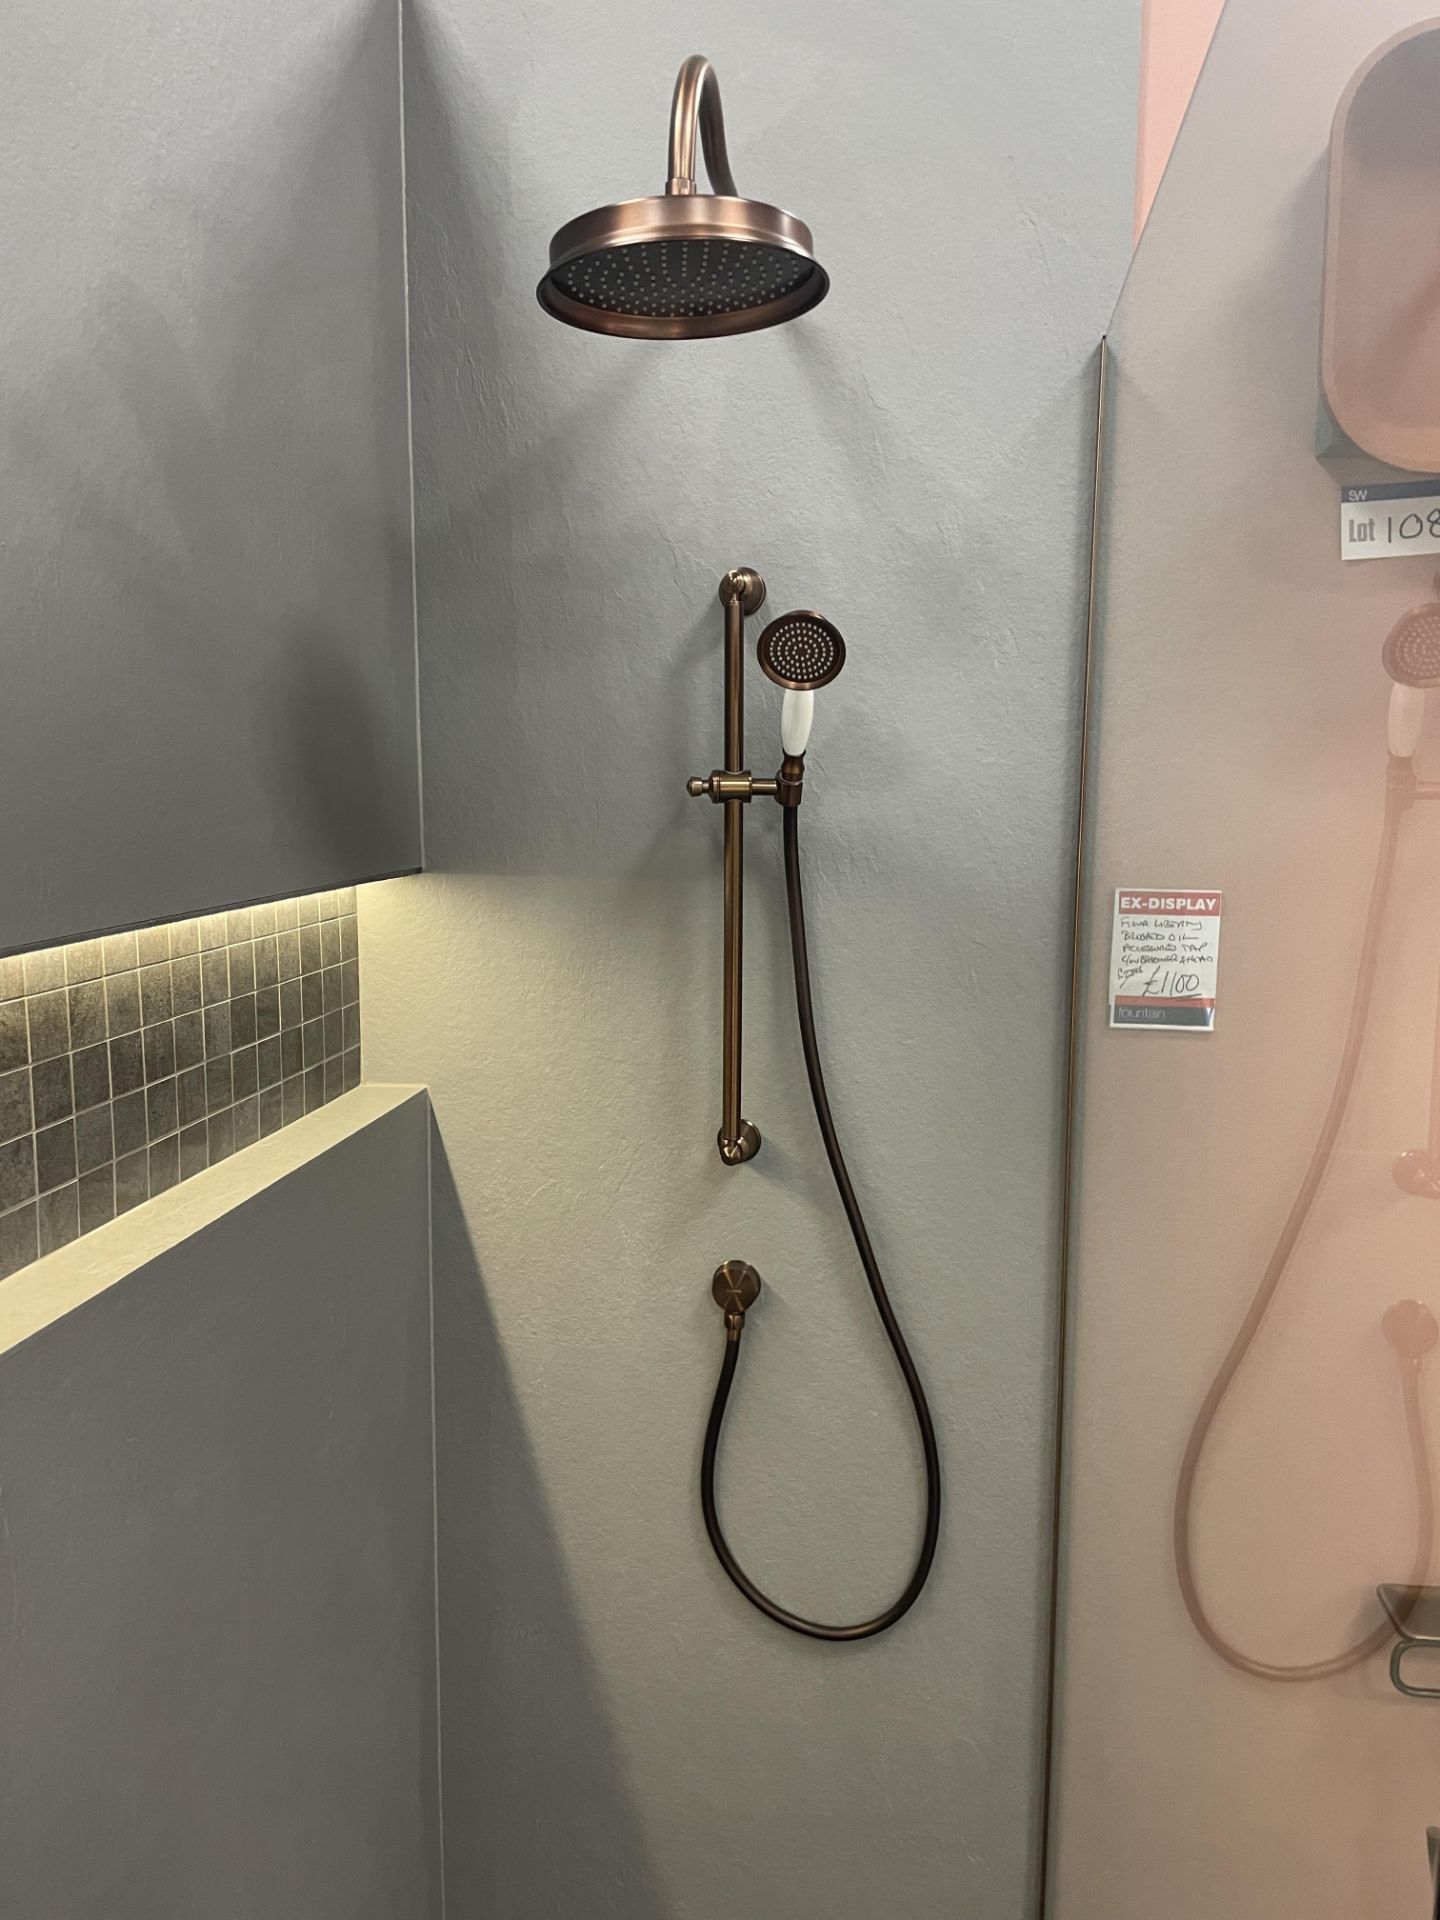 Flova Liberty Brushed Oil Open Shower, with Flova showerhead, flexible showerhead and mixer taps, - Image 3 of 4